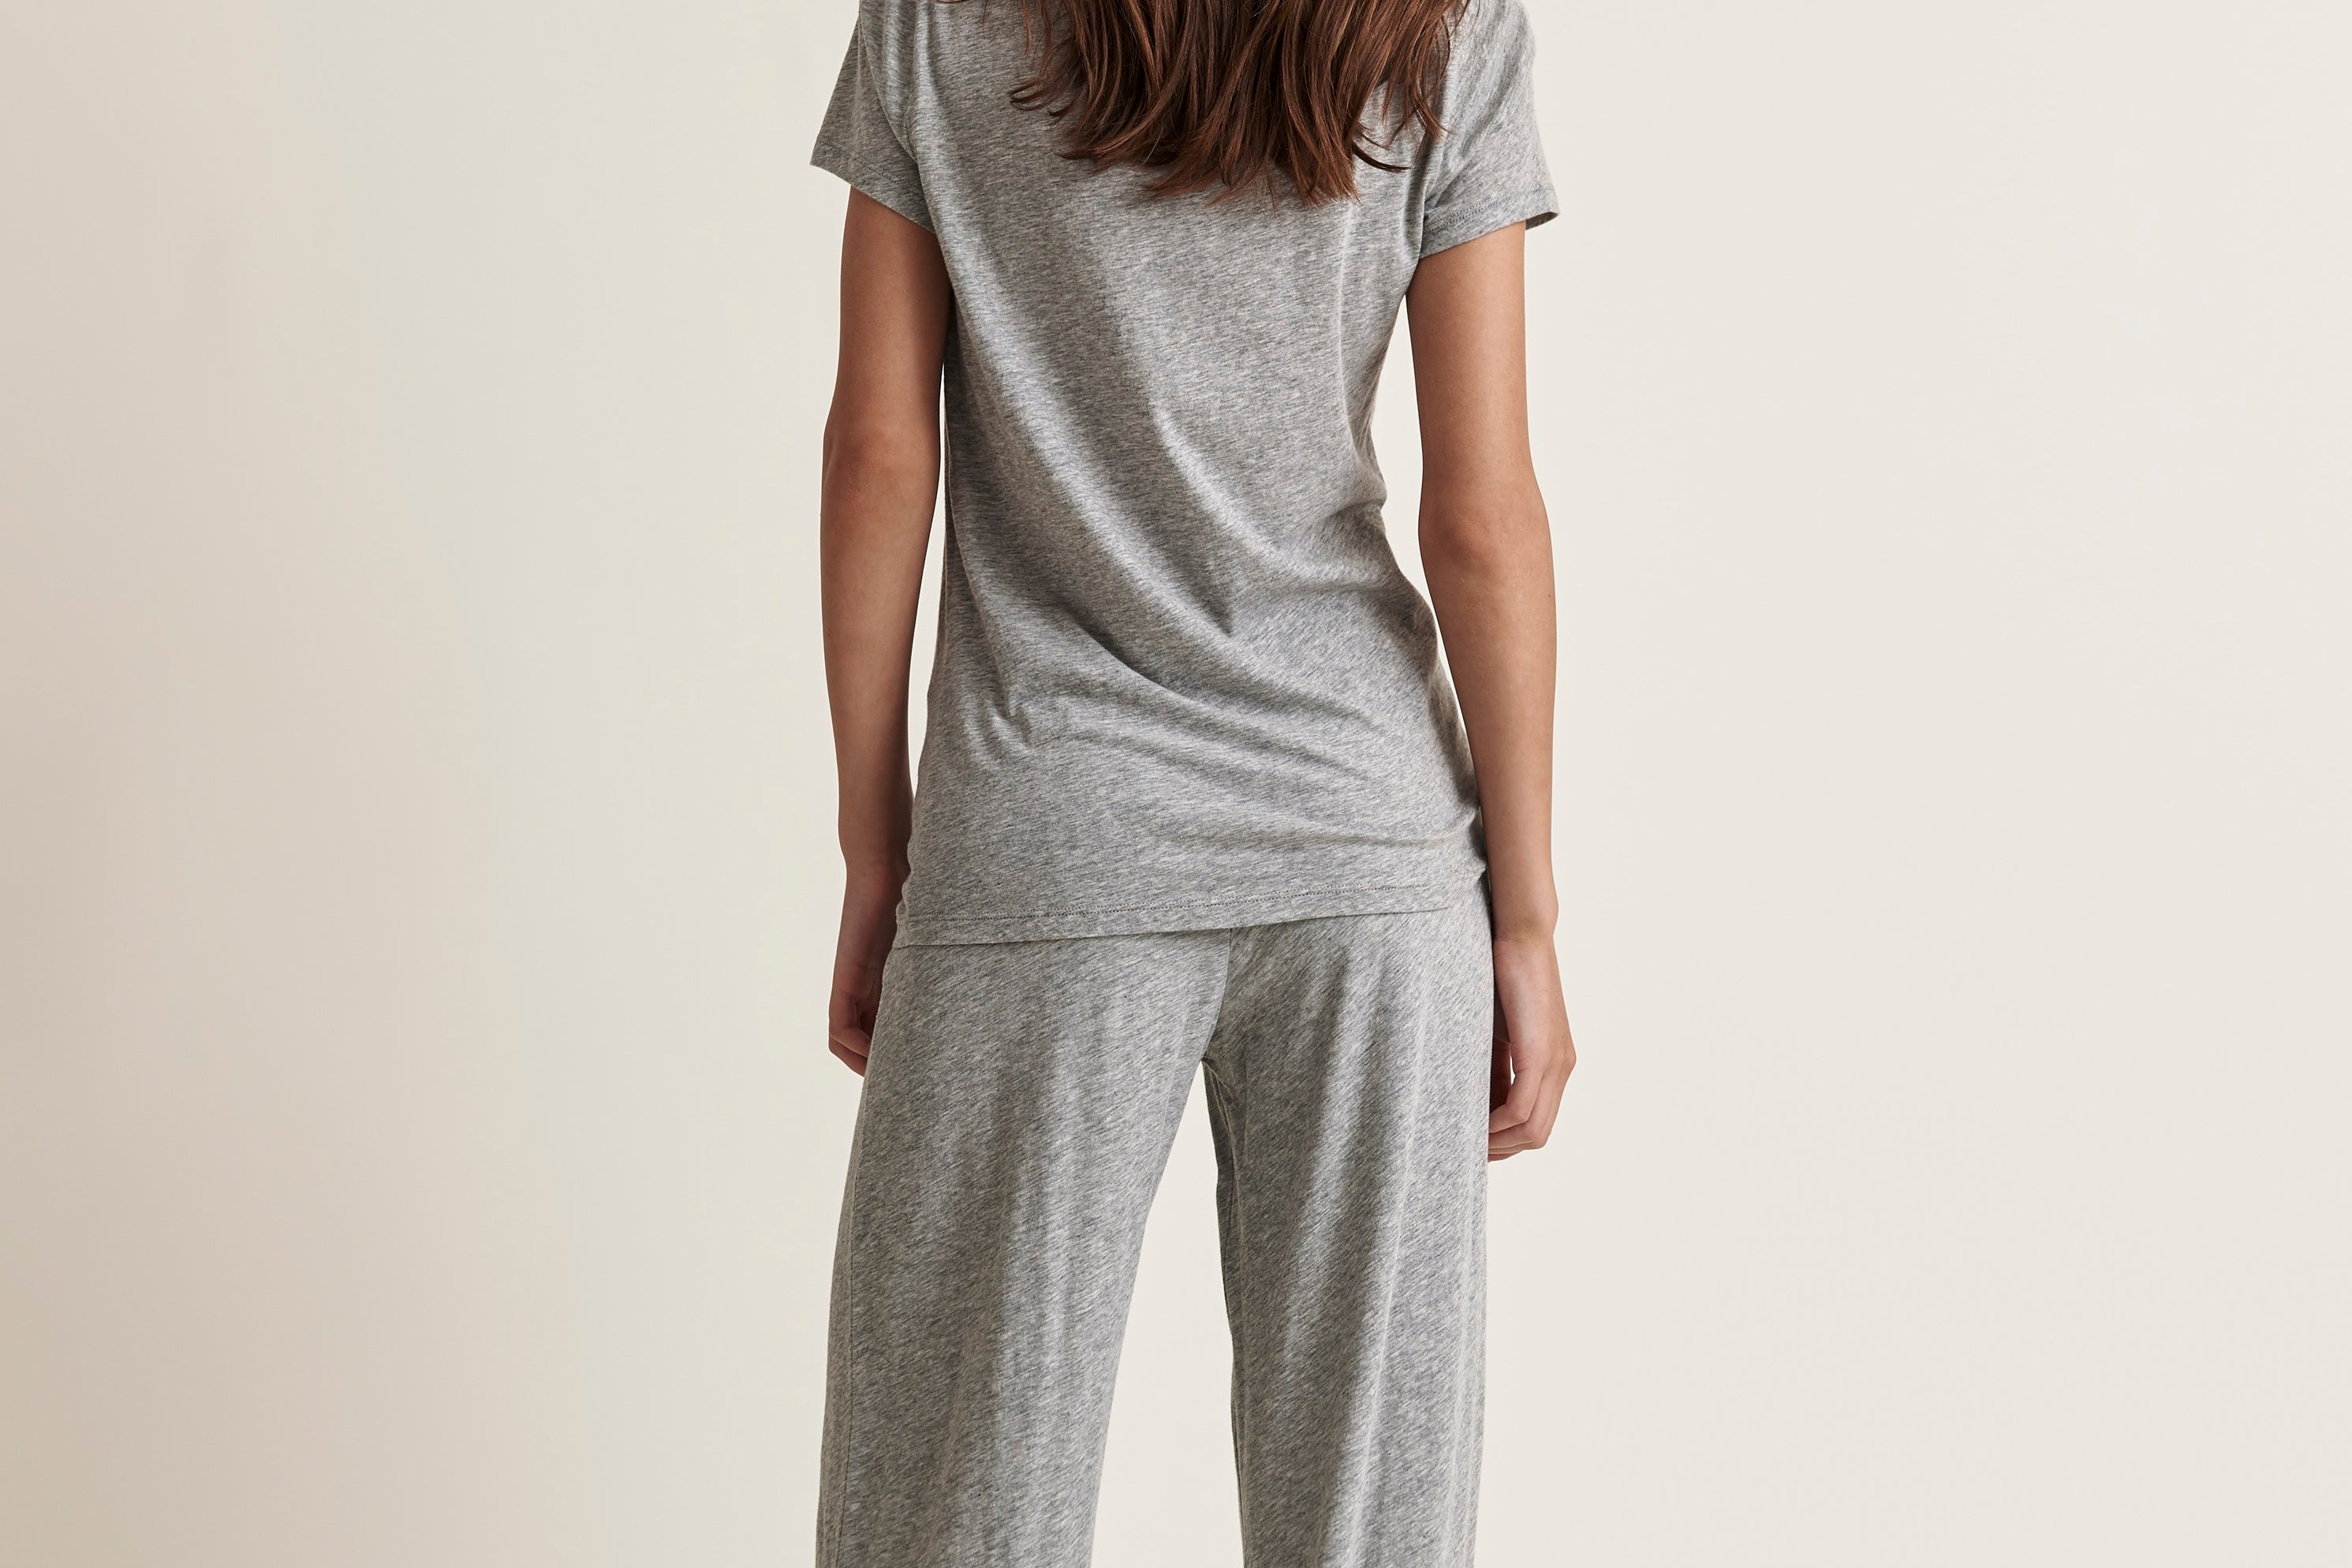 Double Layer Pant – Skin. Addressing the body.